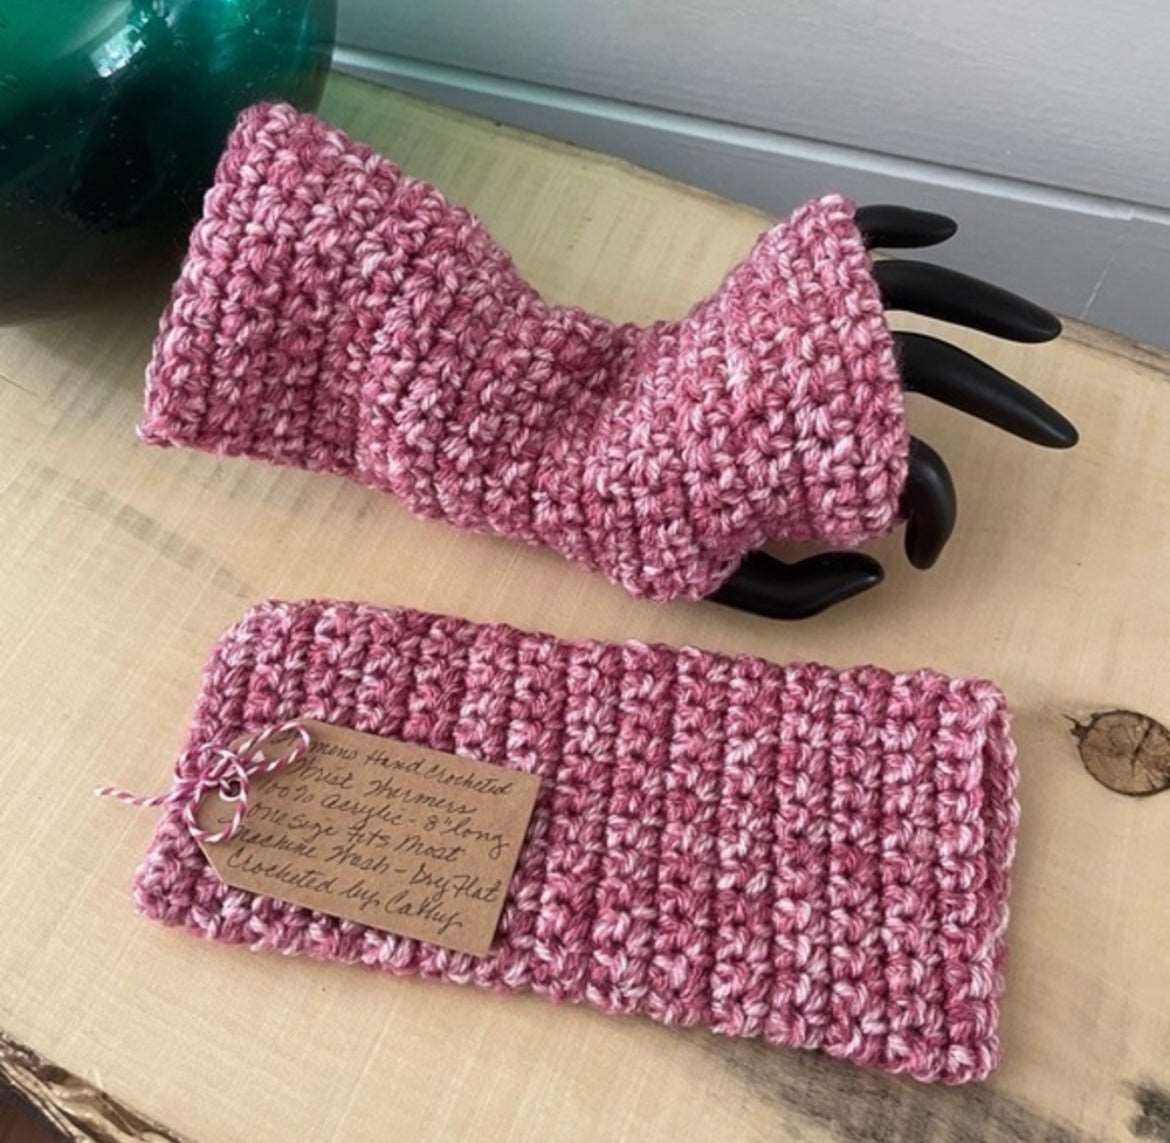 Fingerless Gloves in Pink Marble Gaming Texting Hand Crocheted Wrist Warmers